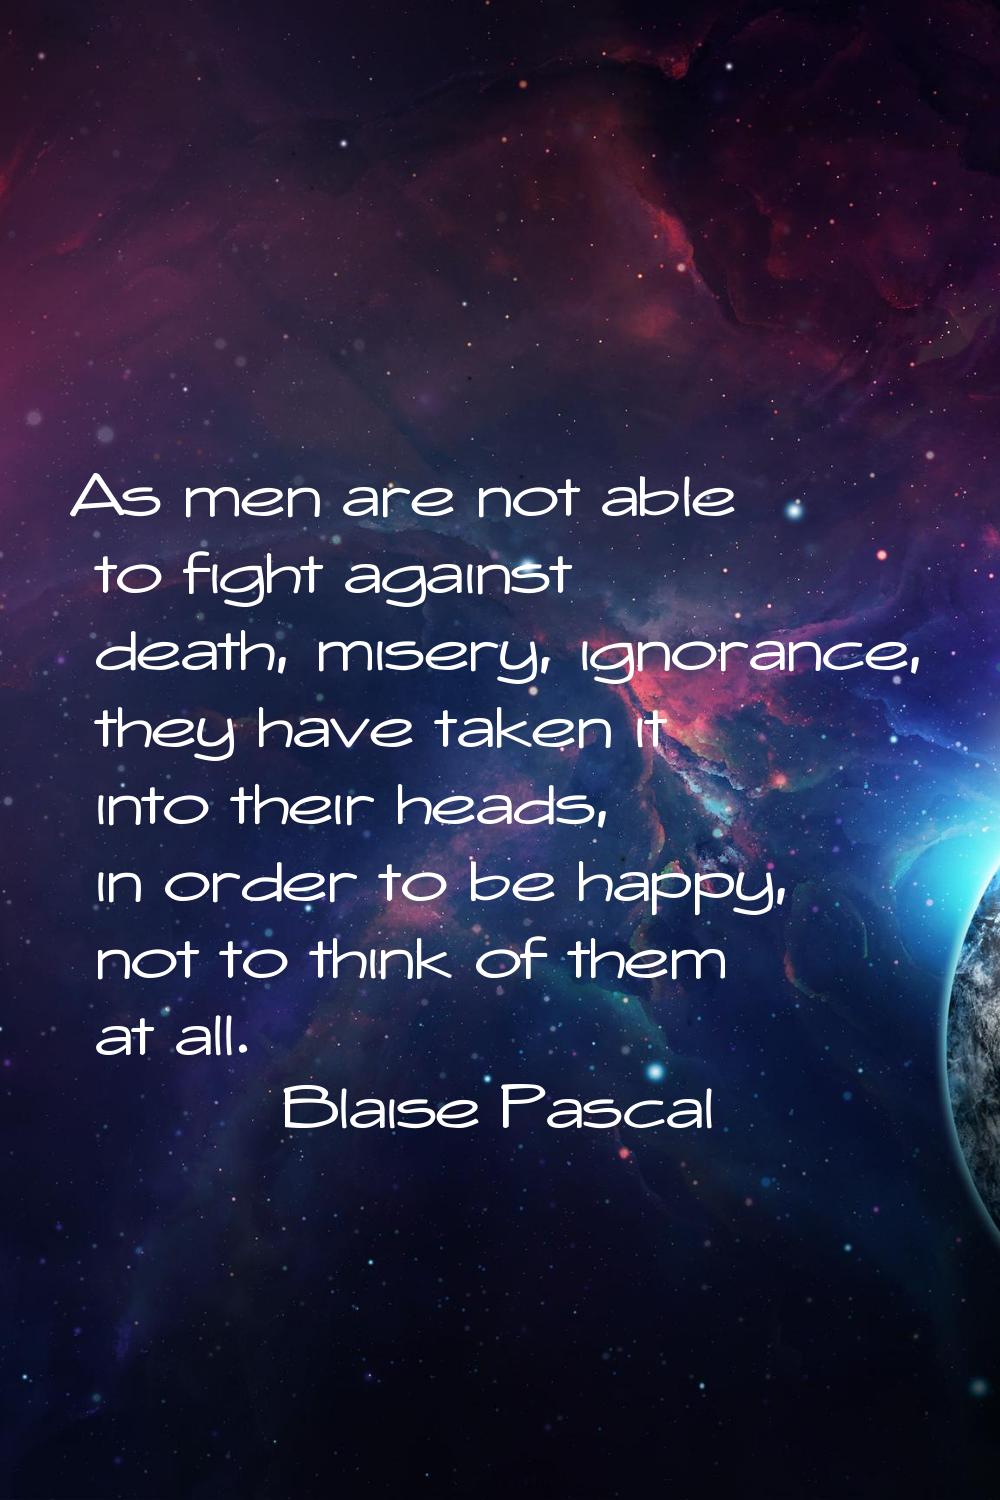 As men are not able to fight against death, misery, ignorance, they have taken it into their heads,